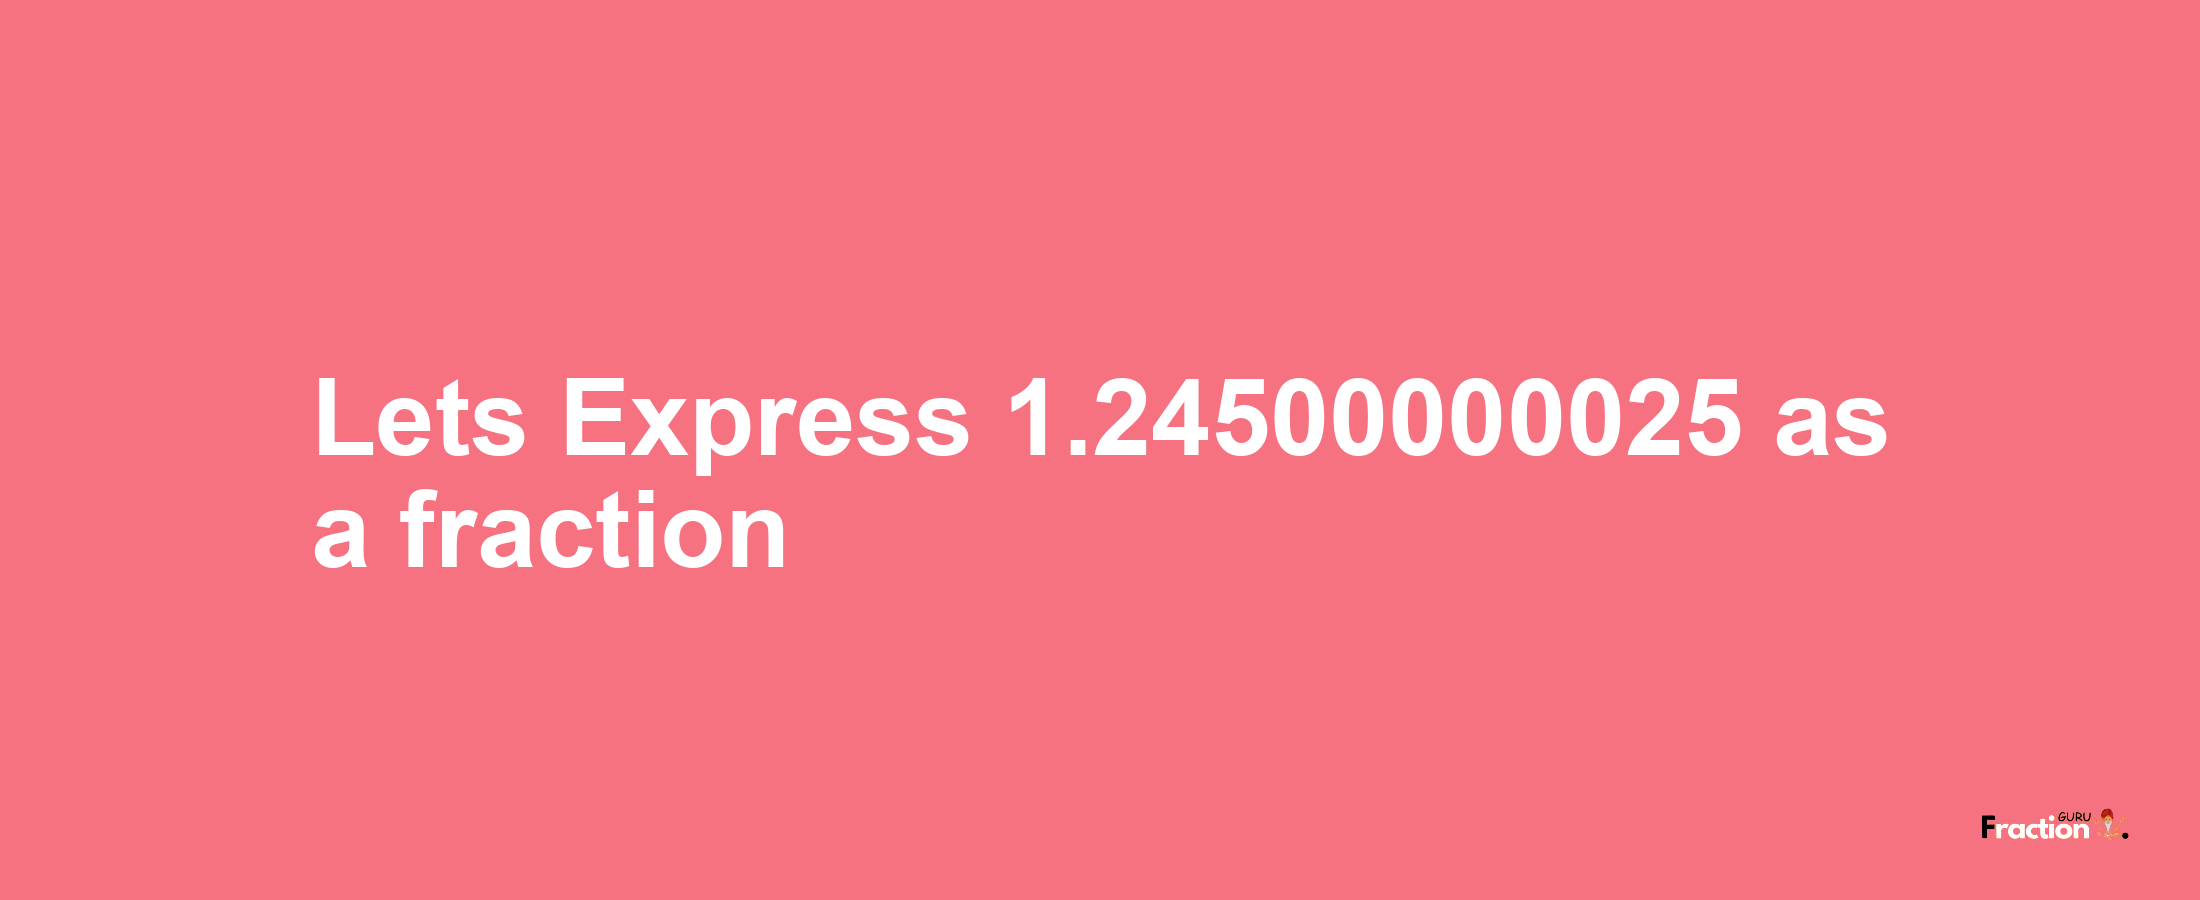 Lets Express 1.24500000025 as afraction